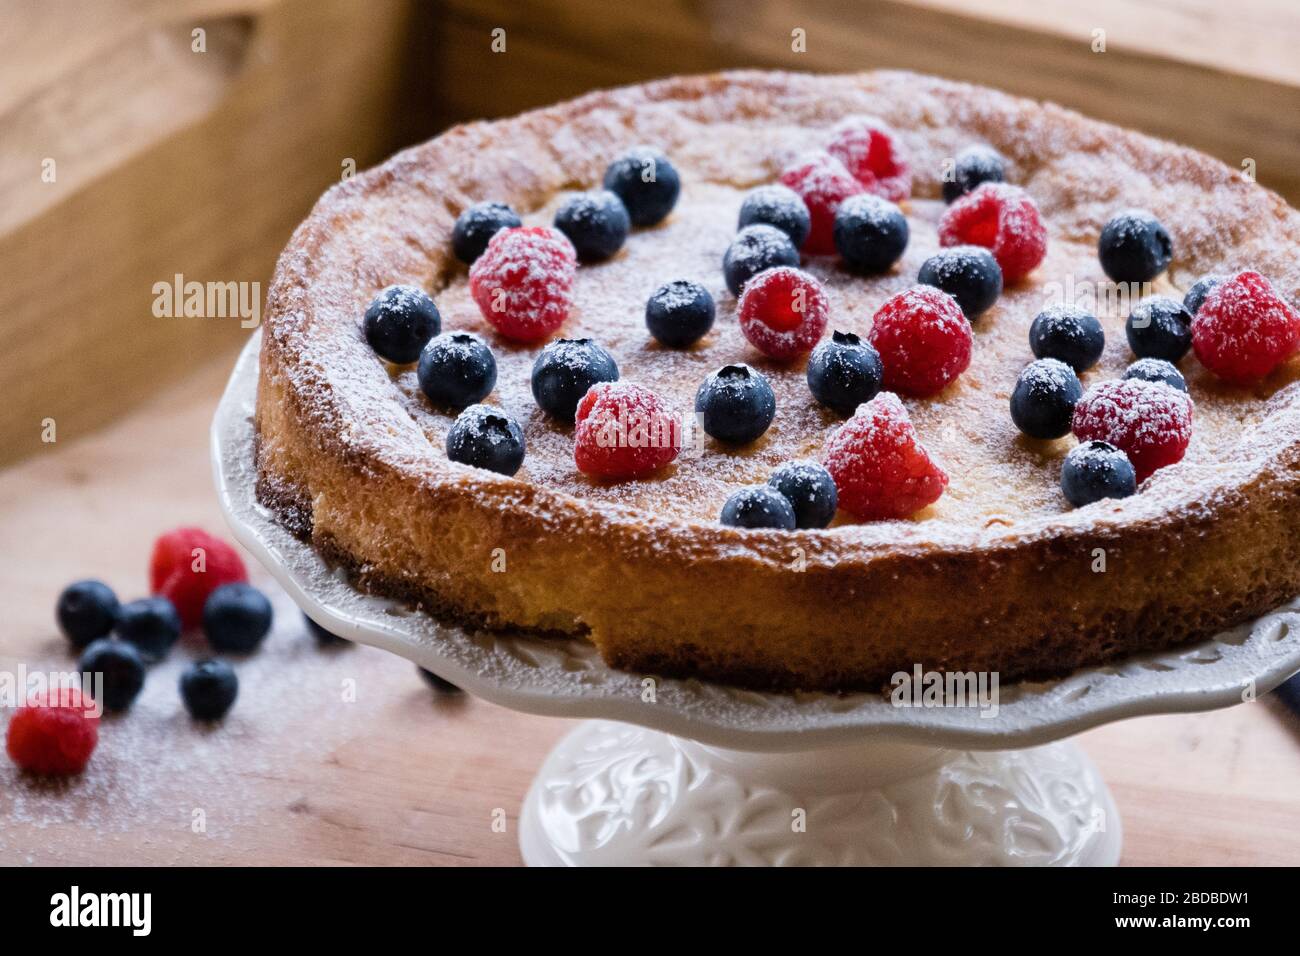 Freshly baked cake with fresh berries on top Stock Photo